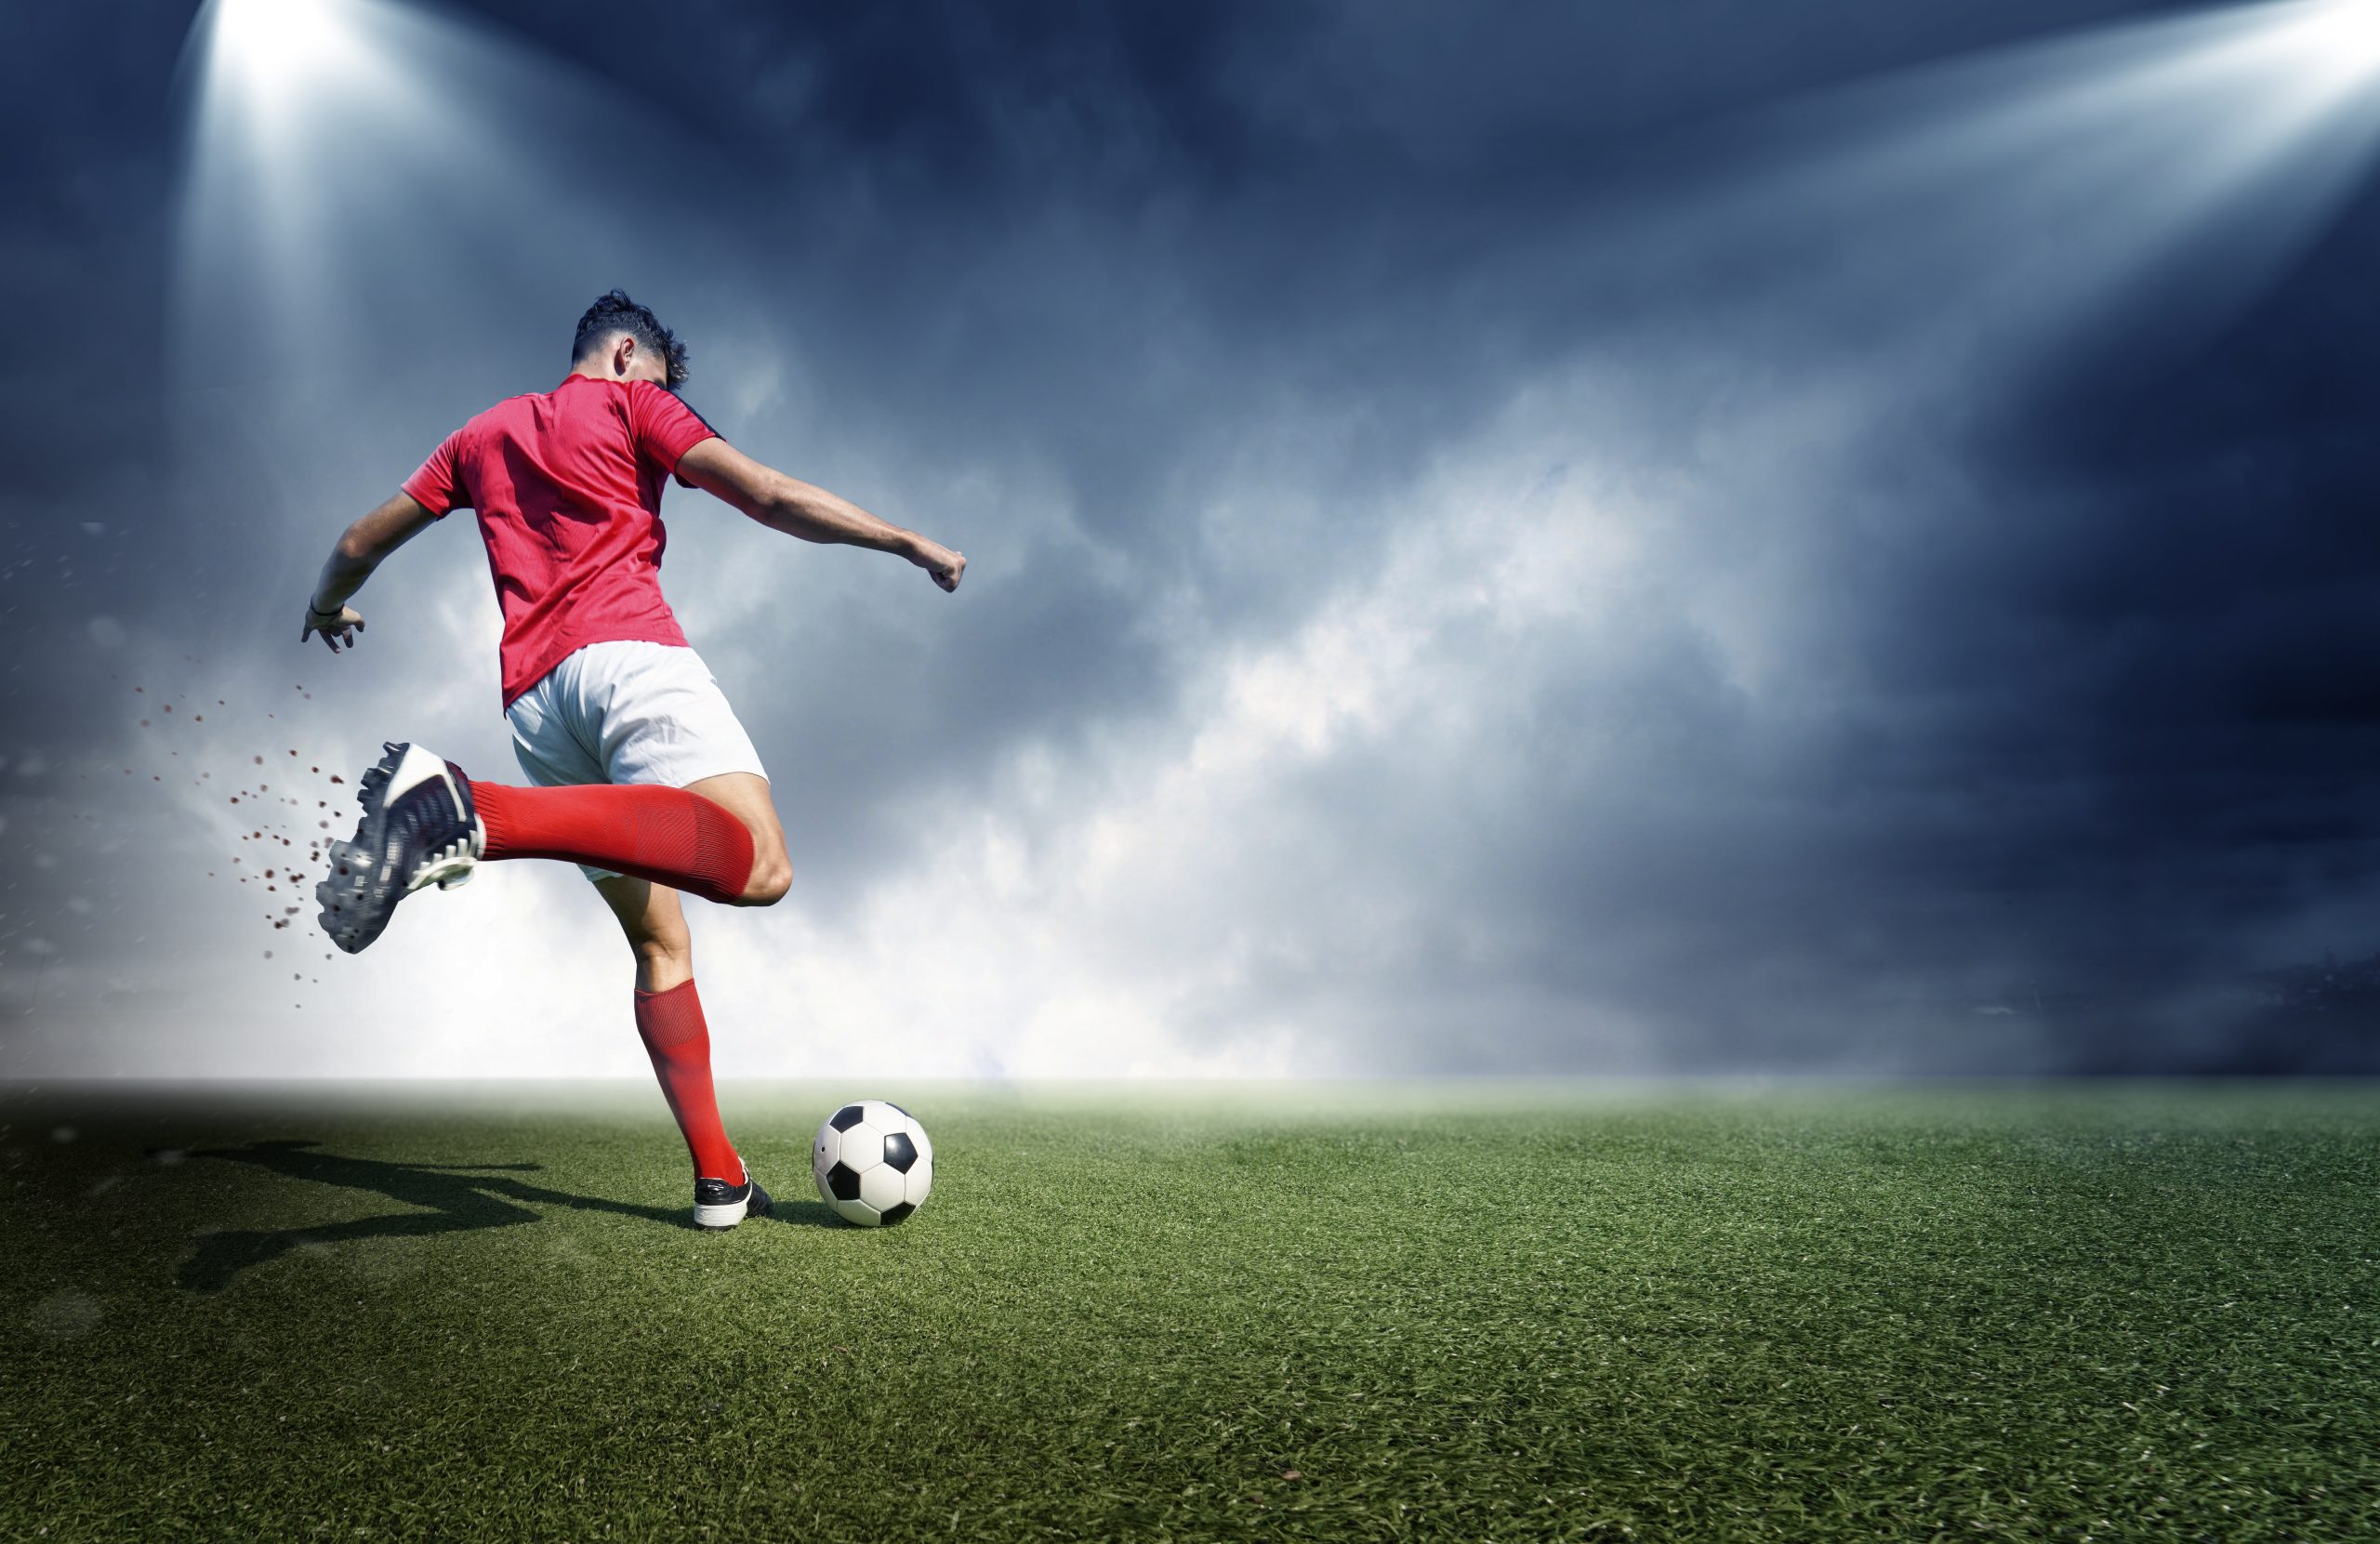 Tips for playing soccer without injuring your feet